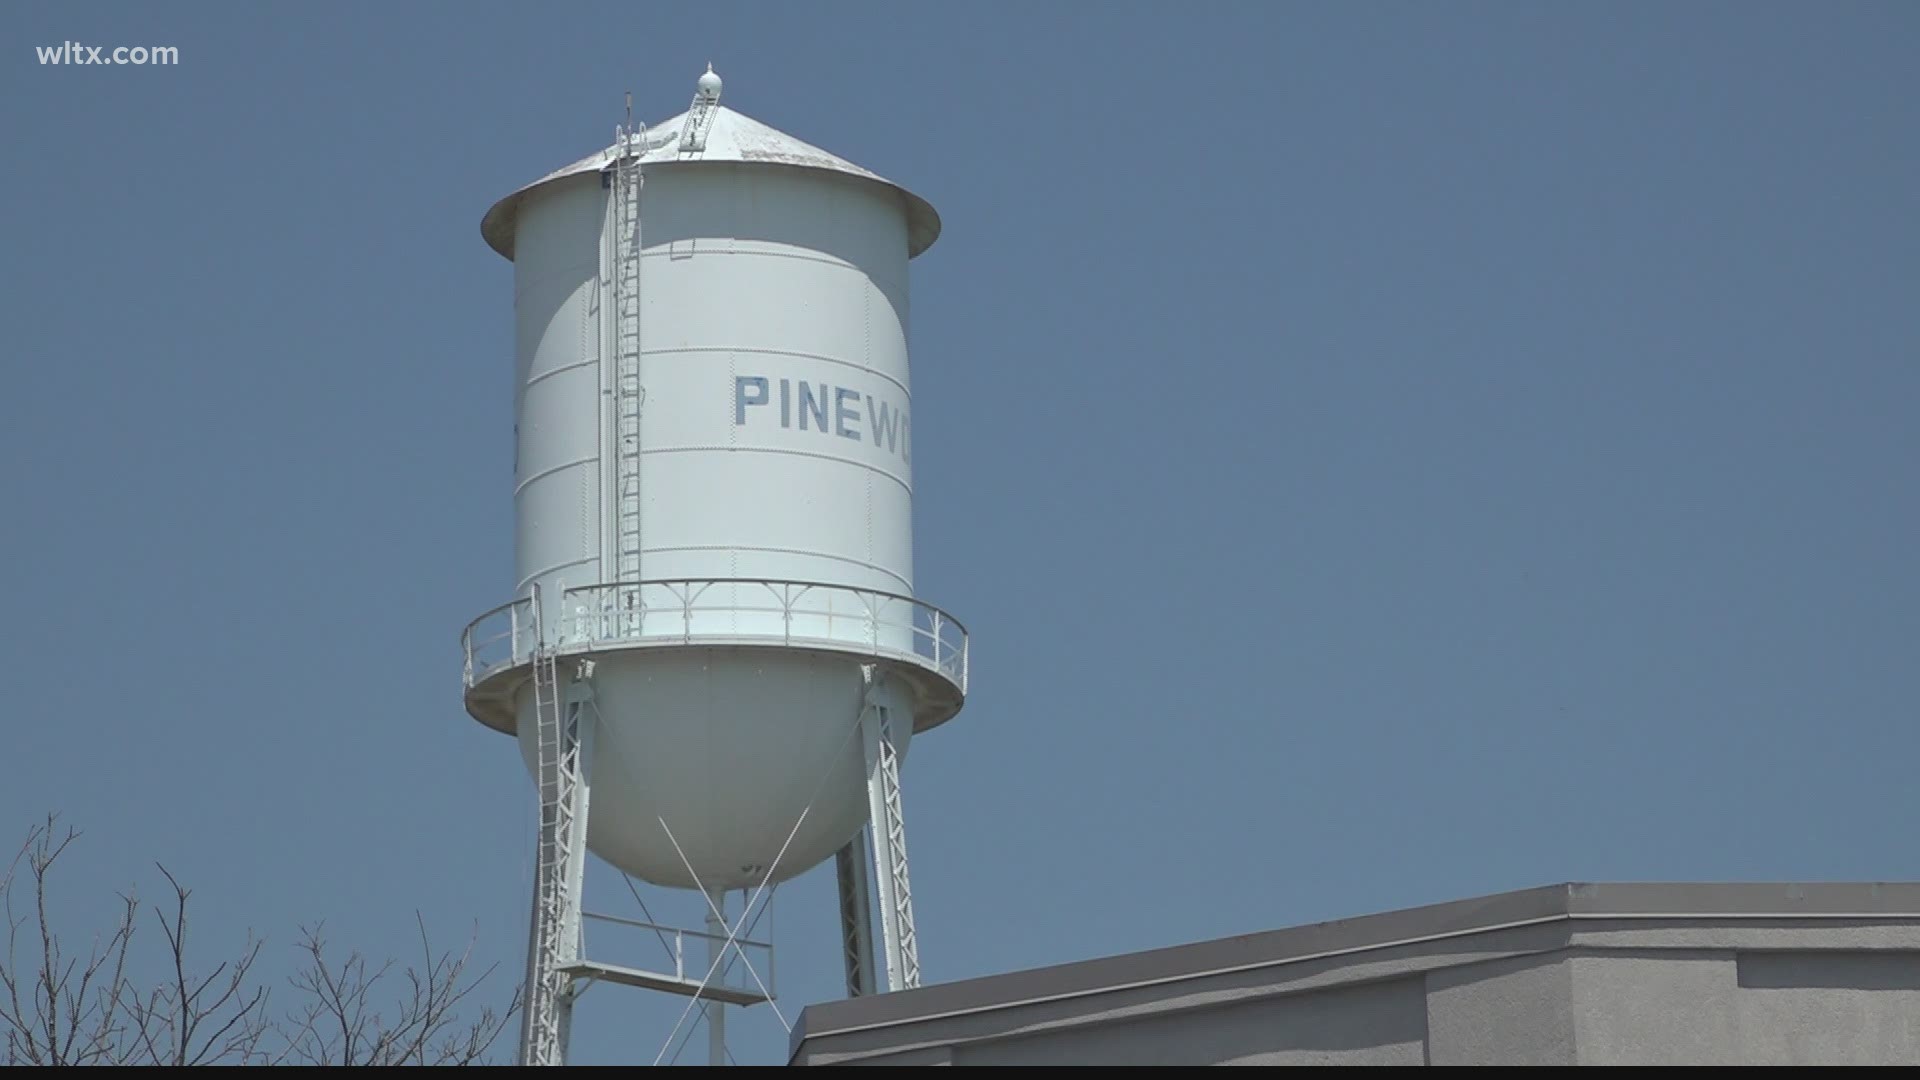 The mayor said they could get up to $200K and he would like to fix the towns water tower.